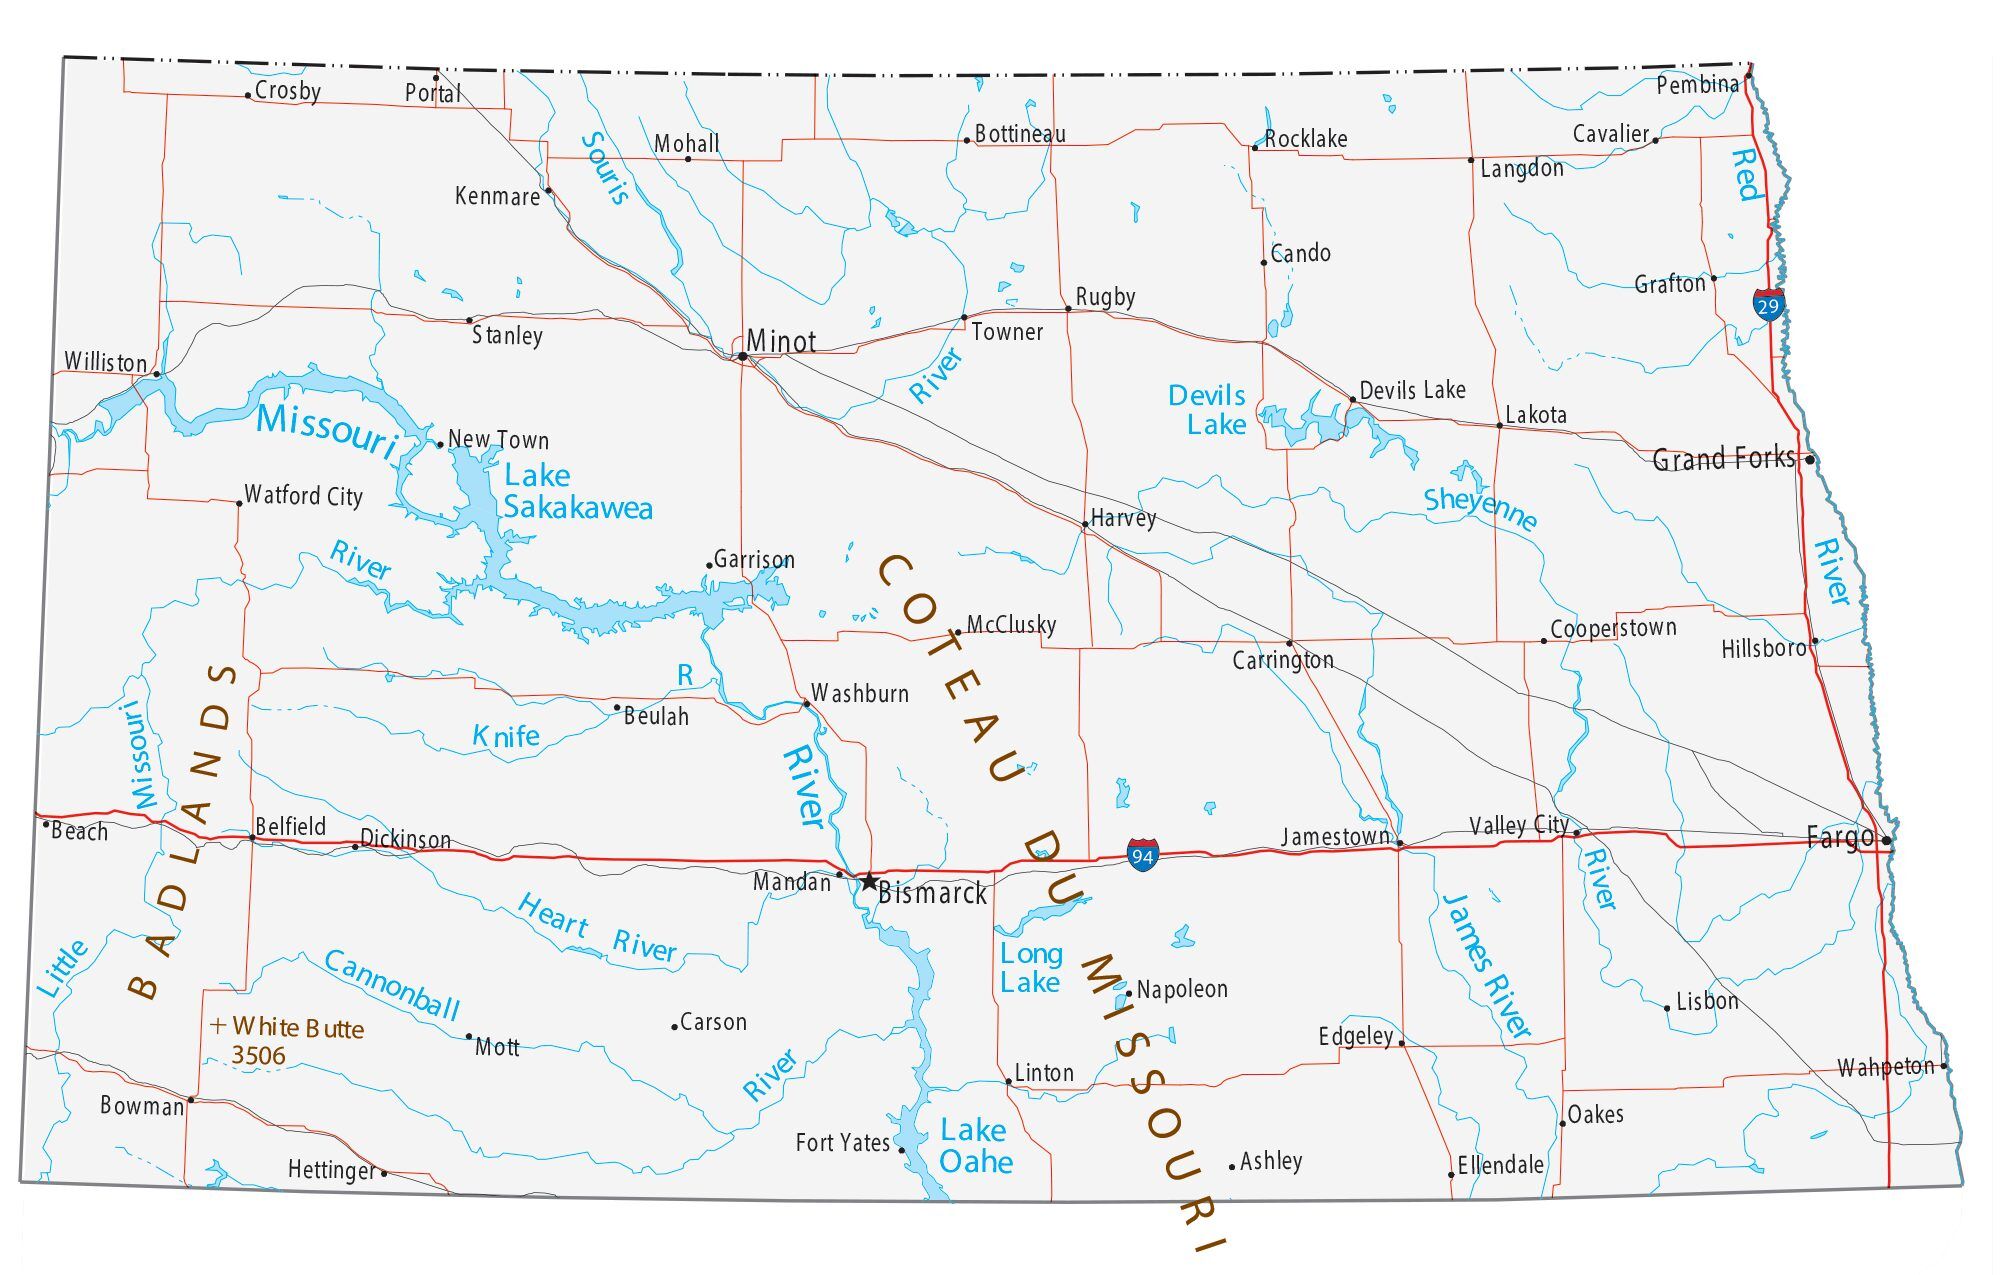 Map of North Dakota - Cities and Roads - GIS Geography